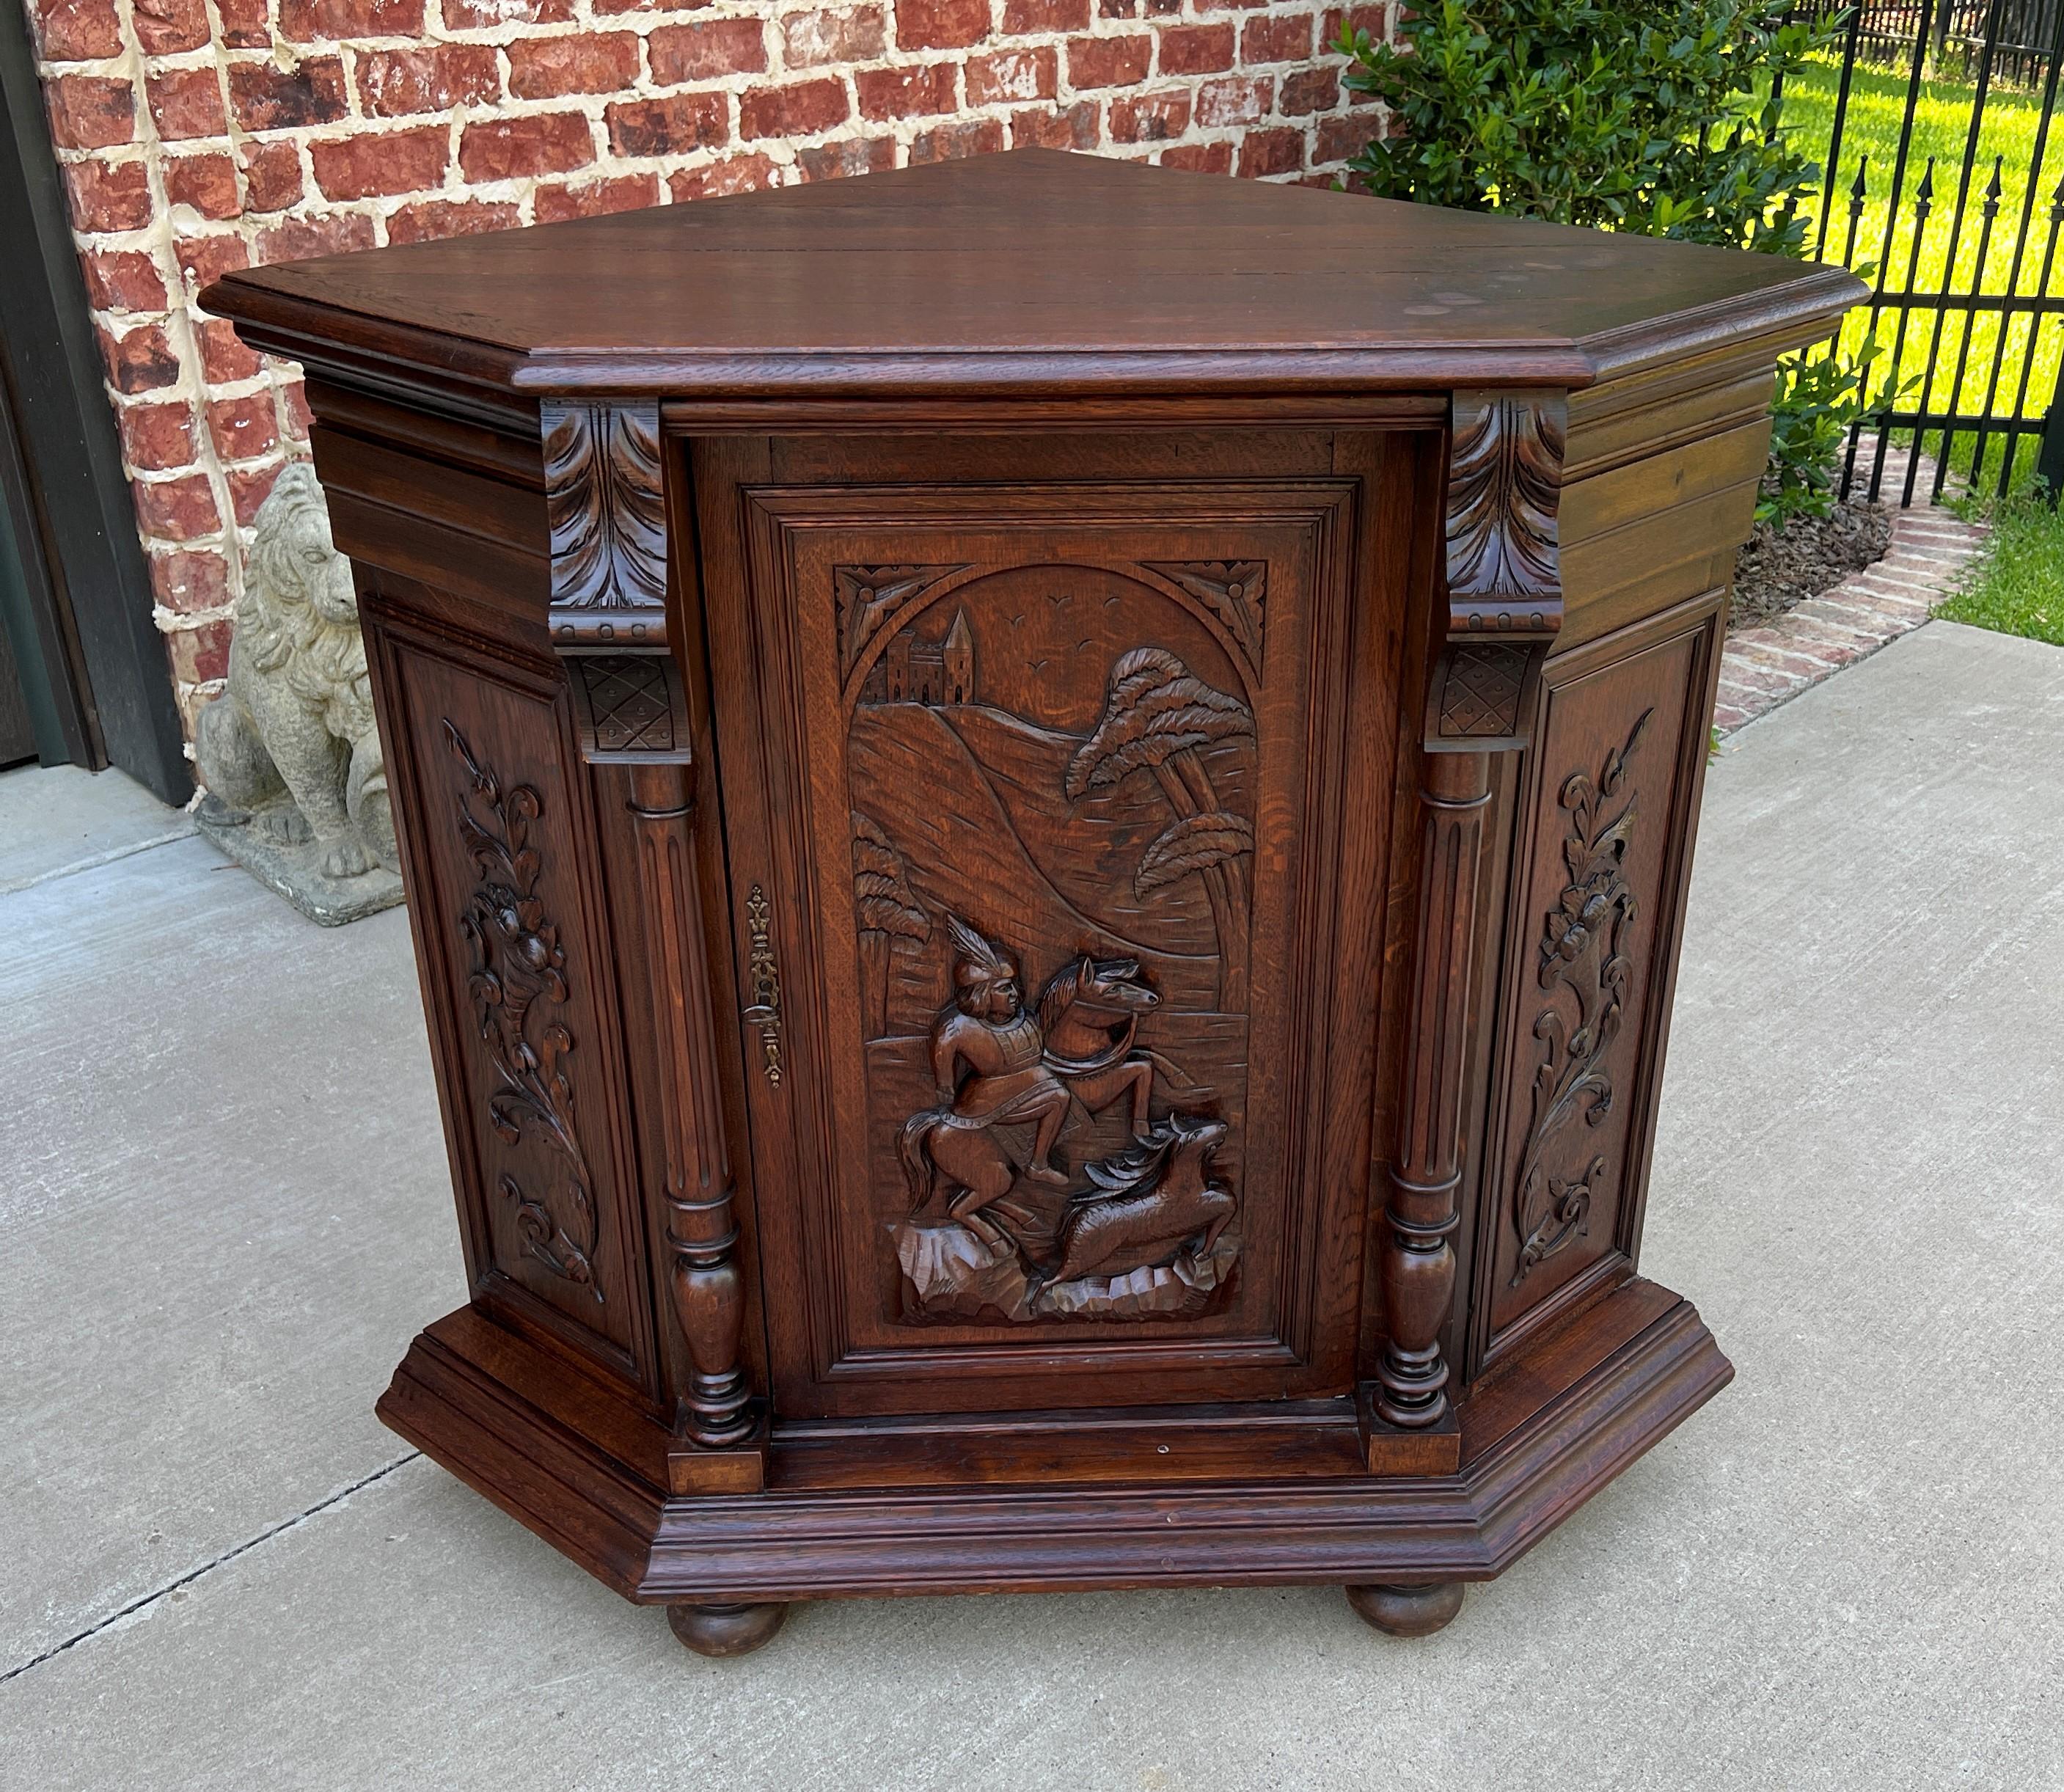 BEAUTIFULLY CARVED Antique French Oak CORNER Cabinet, Bookcase, Display or Storage Cabinet ~~c. 1880s

Full of classic French style~~charming horse and rider hunting scene with deer on lower door~~fluted columns with canted corners~~plank